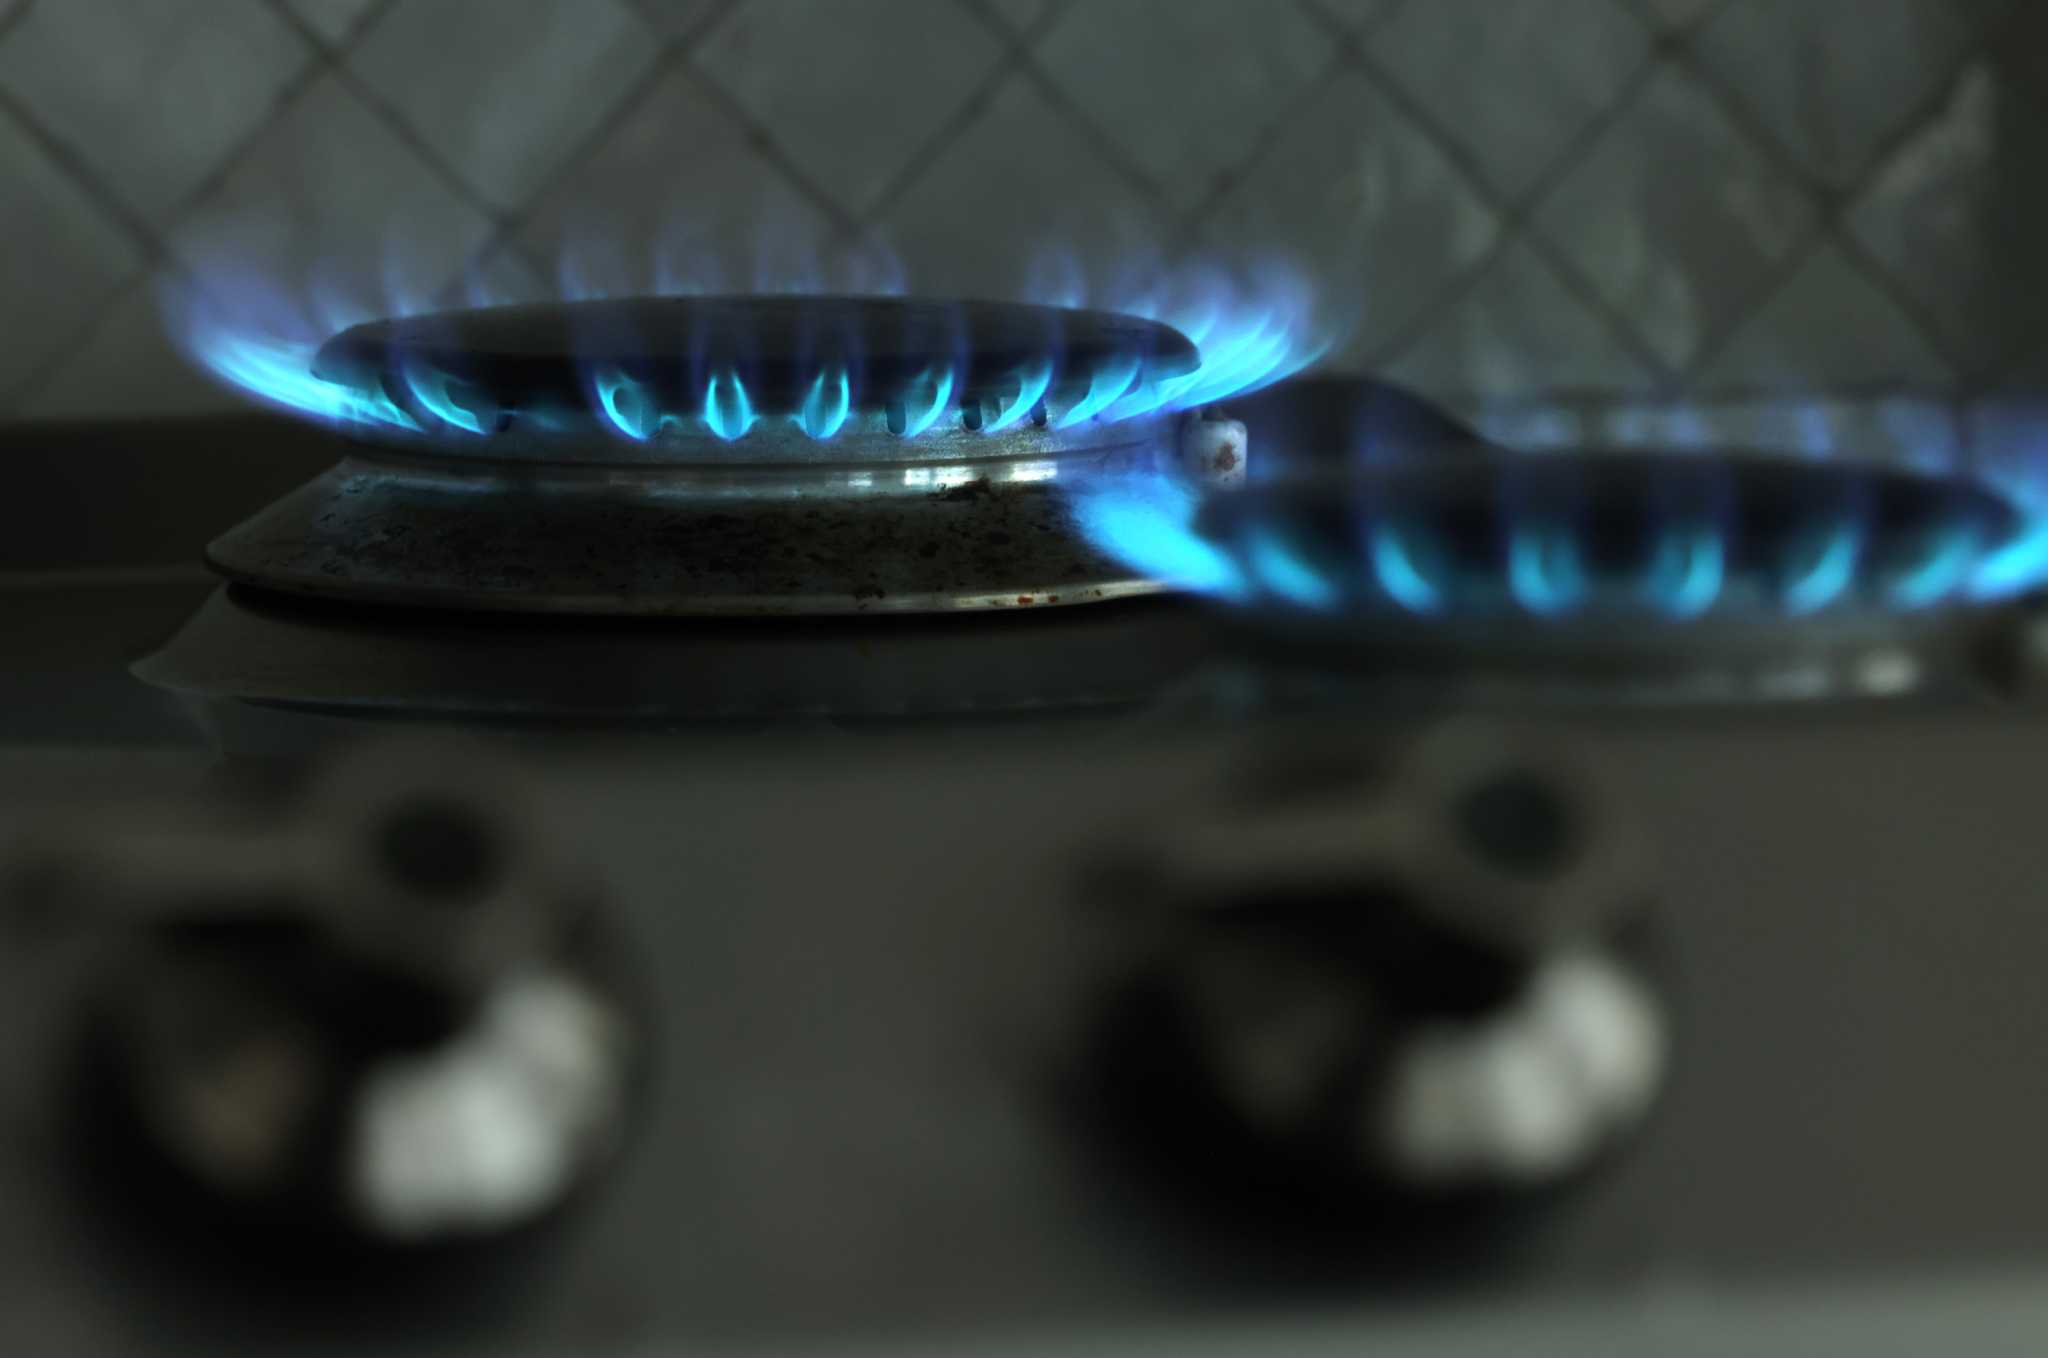 Why Does A Home Gas Range Not Have To Be Vented? 